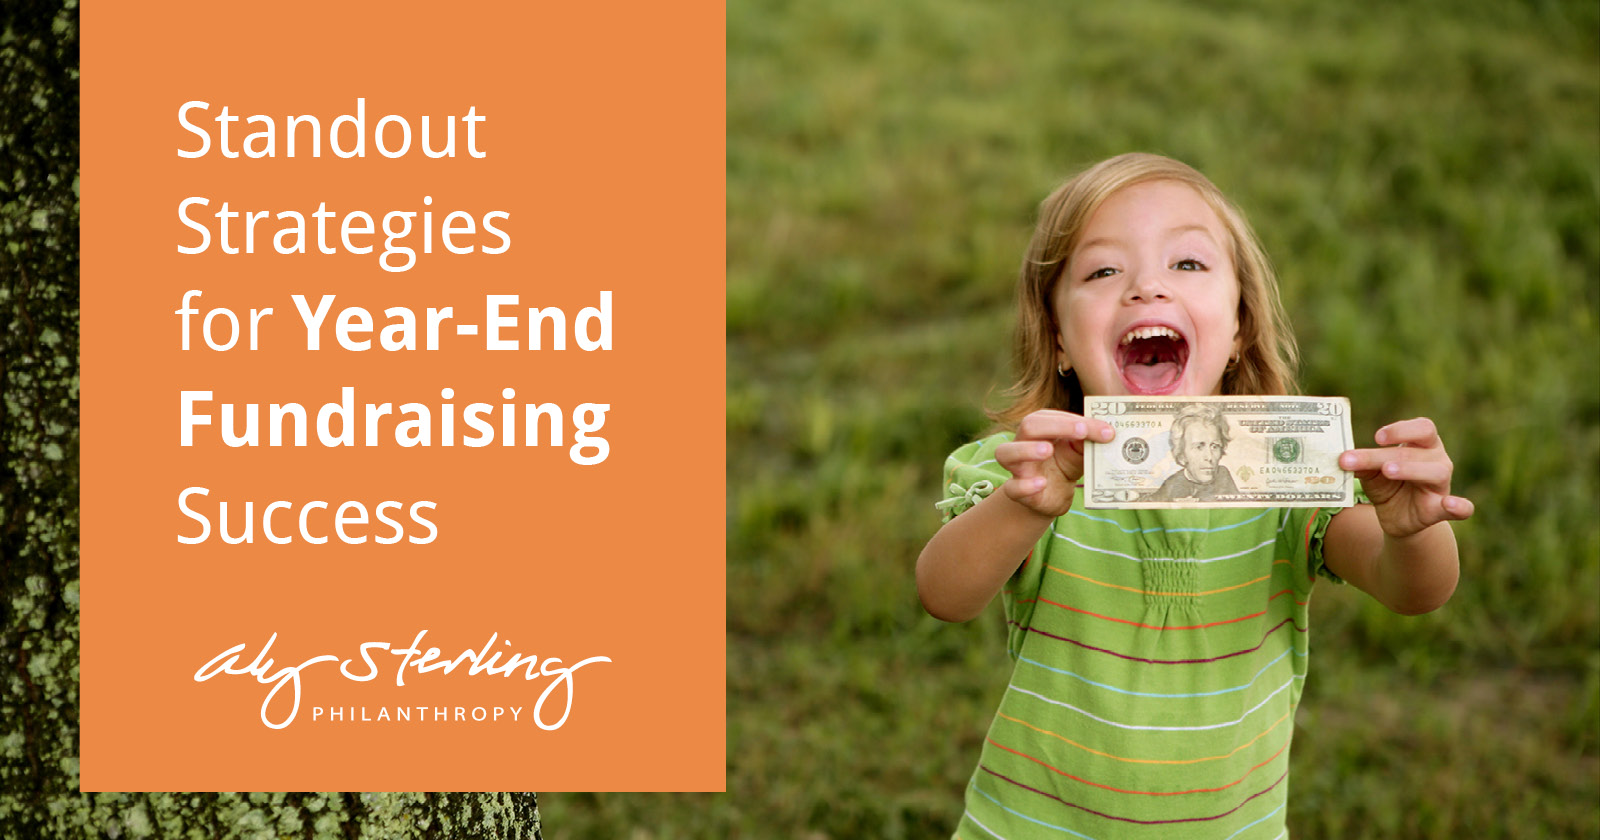 This guide explores five essential strategies to employ for year-end fundraising success.